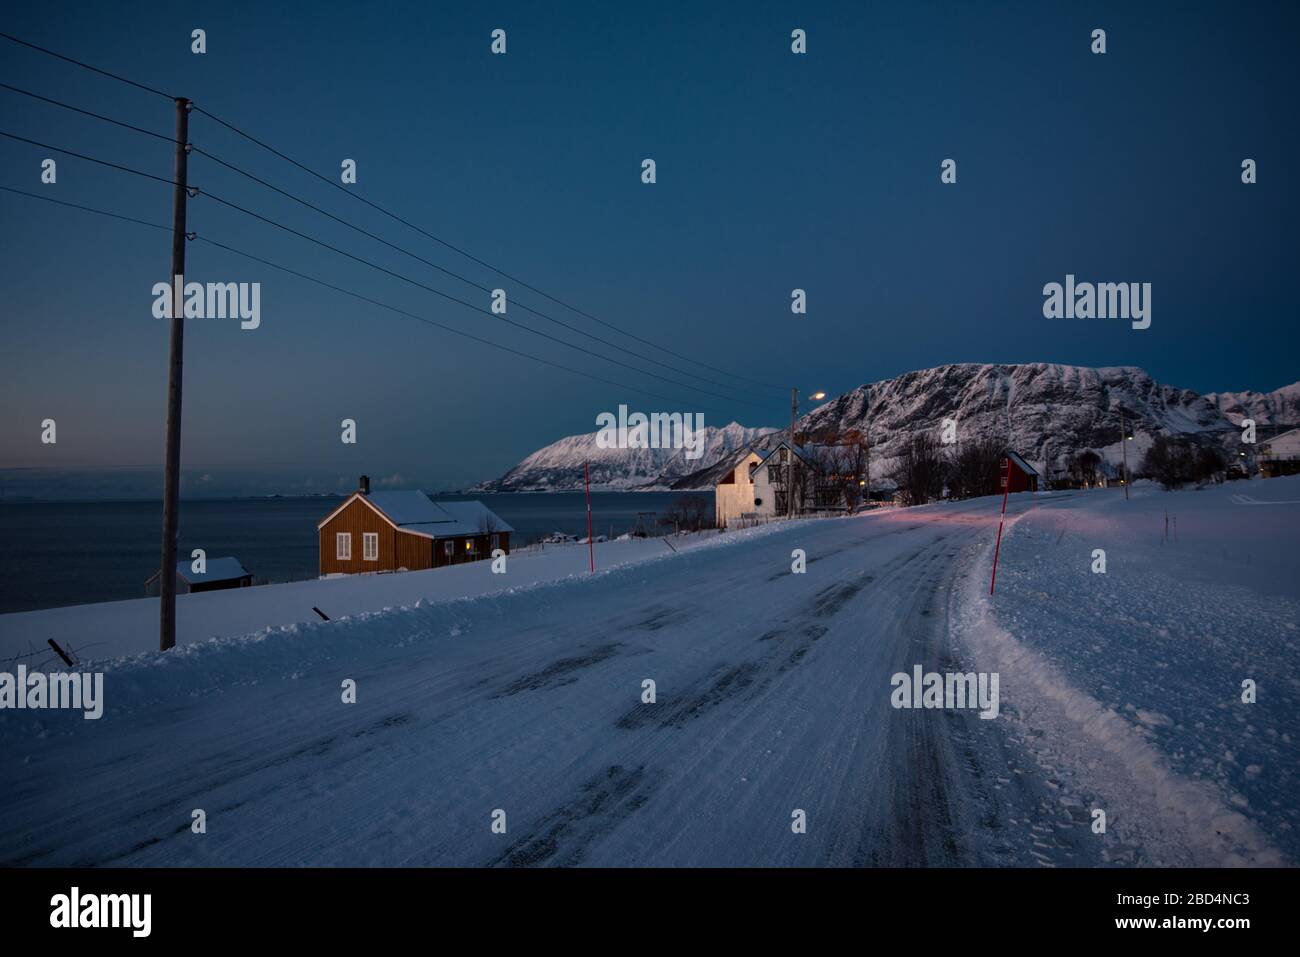 Winter street scenery at dusk in northern Norway Stock Photo